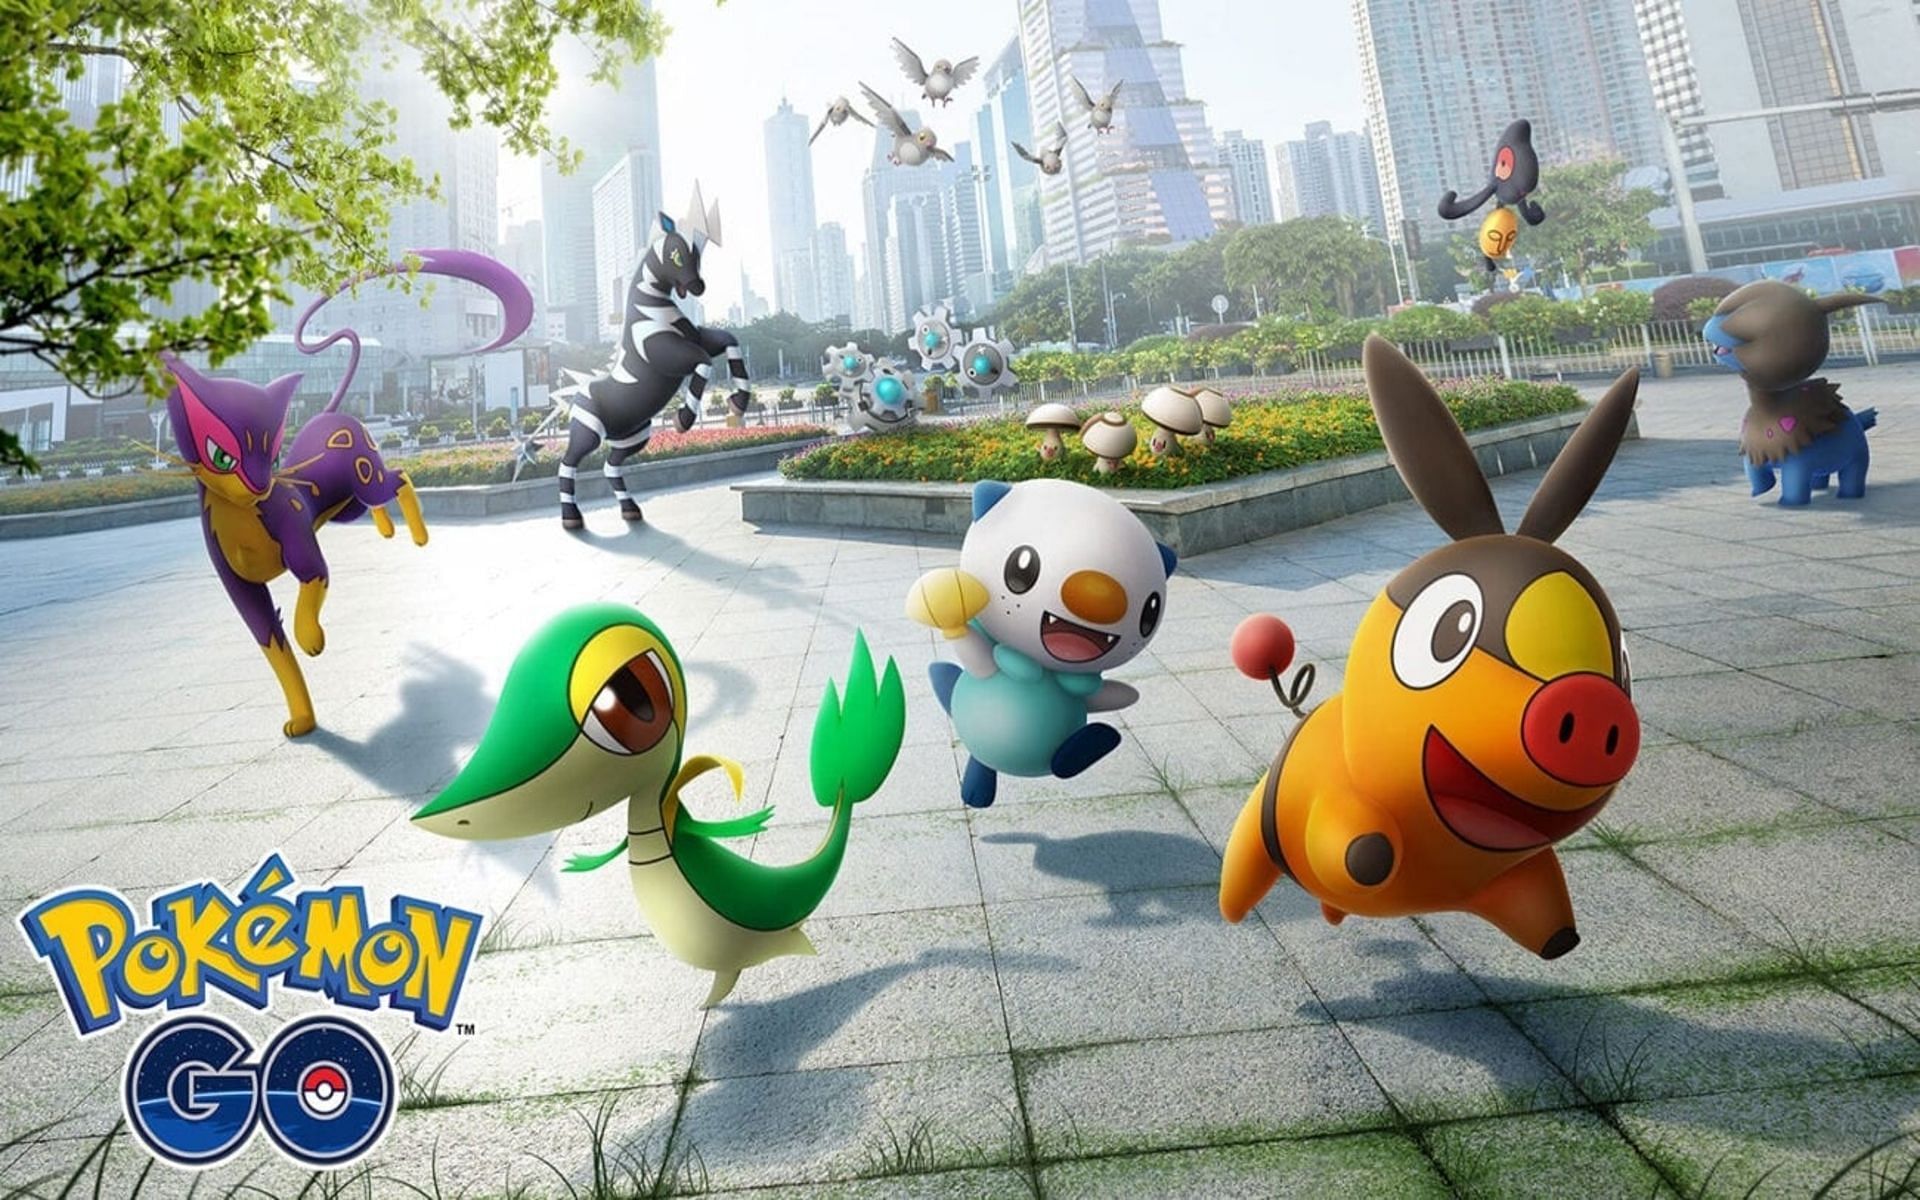 Playing on PC can seriously cut down on walking time in Pokemon GO (Image via Niantic)